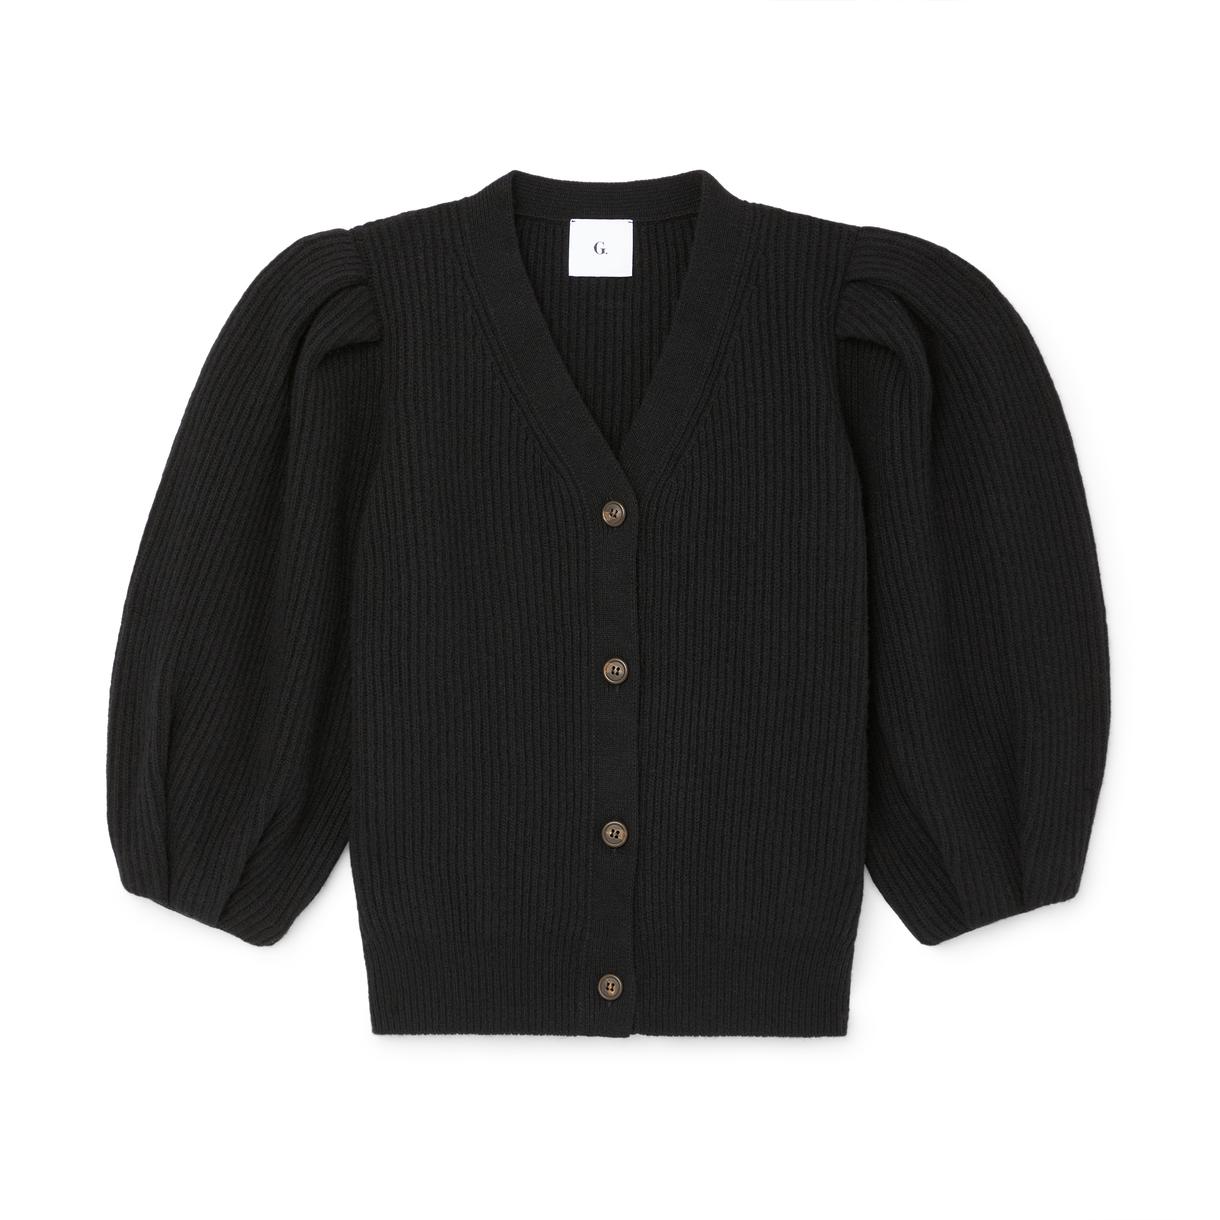 G. Label by goop Foster Ribbed Puff-Sleeve Cardigan